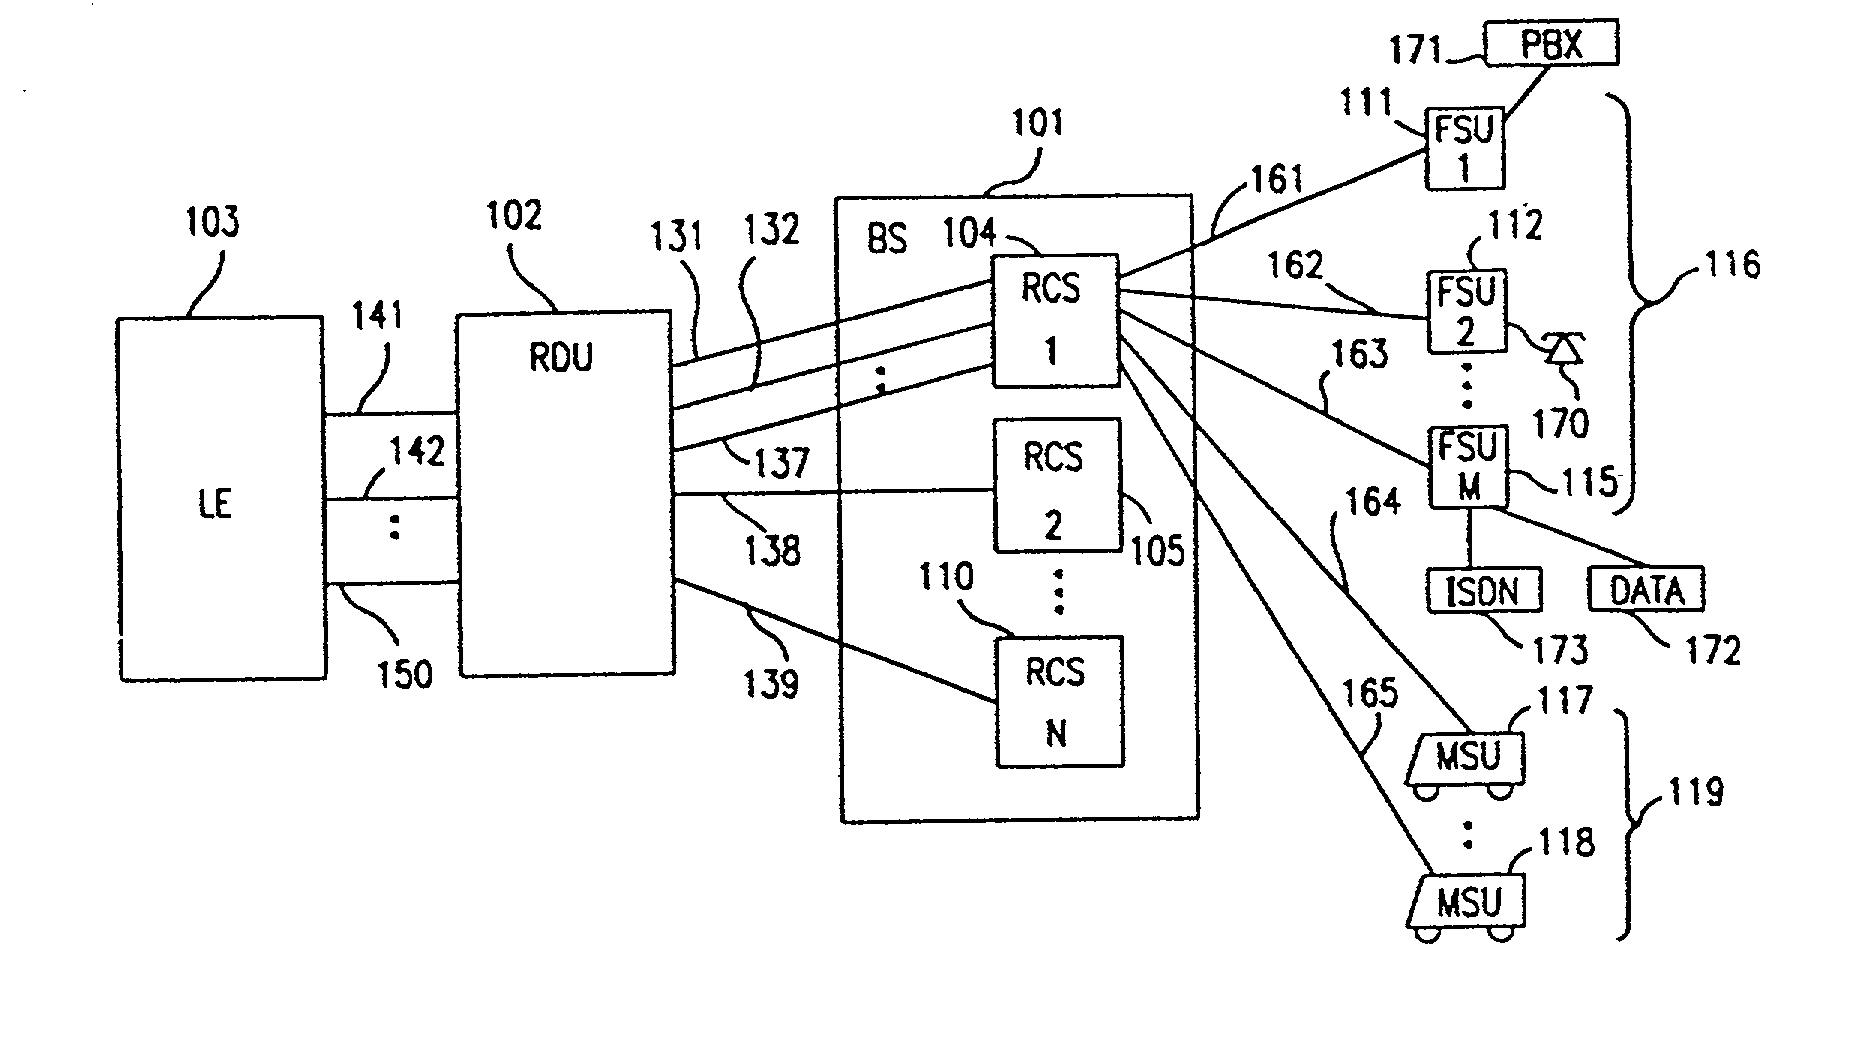 Method for using rapid acquisition spreading codes for spread-spectrum communications